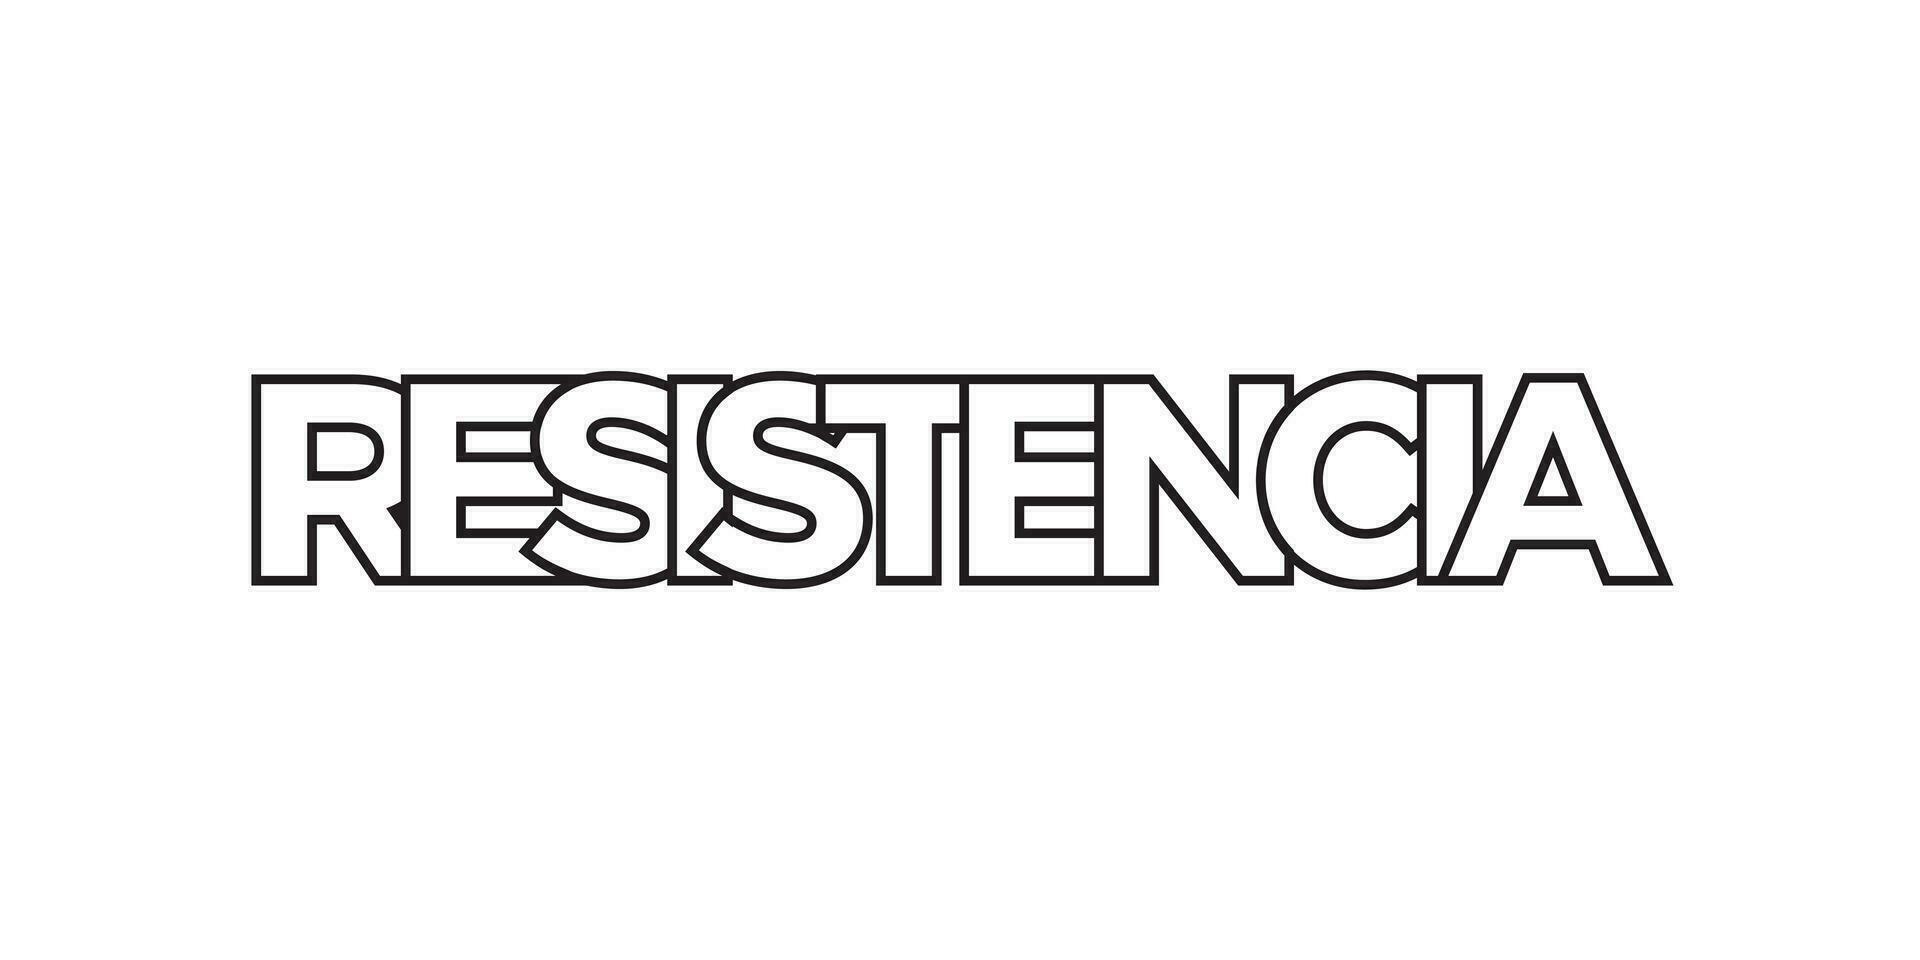 Resistencia in the Argentina emblem. The design features a geometric style, vector illustration with bold typography in a modern font. The graphic slogan lettering.